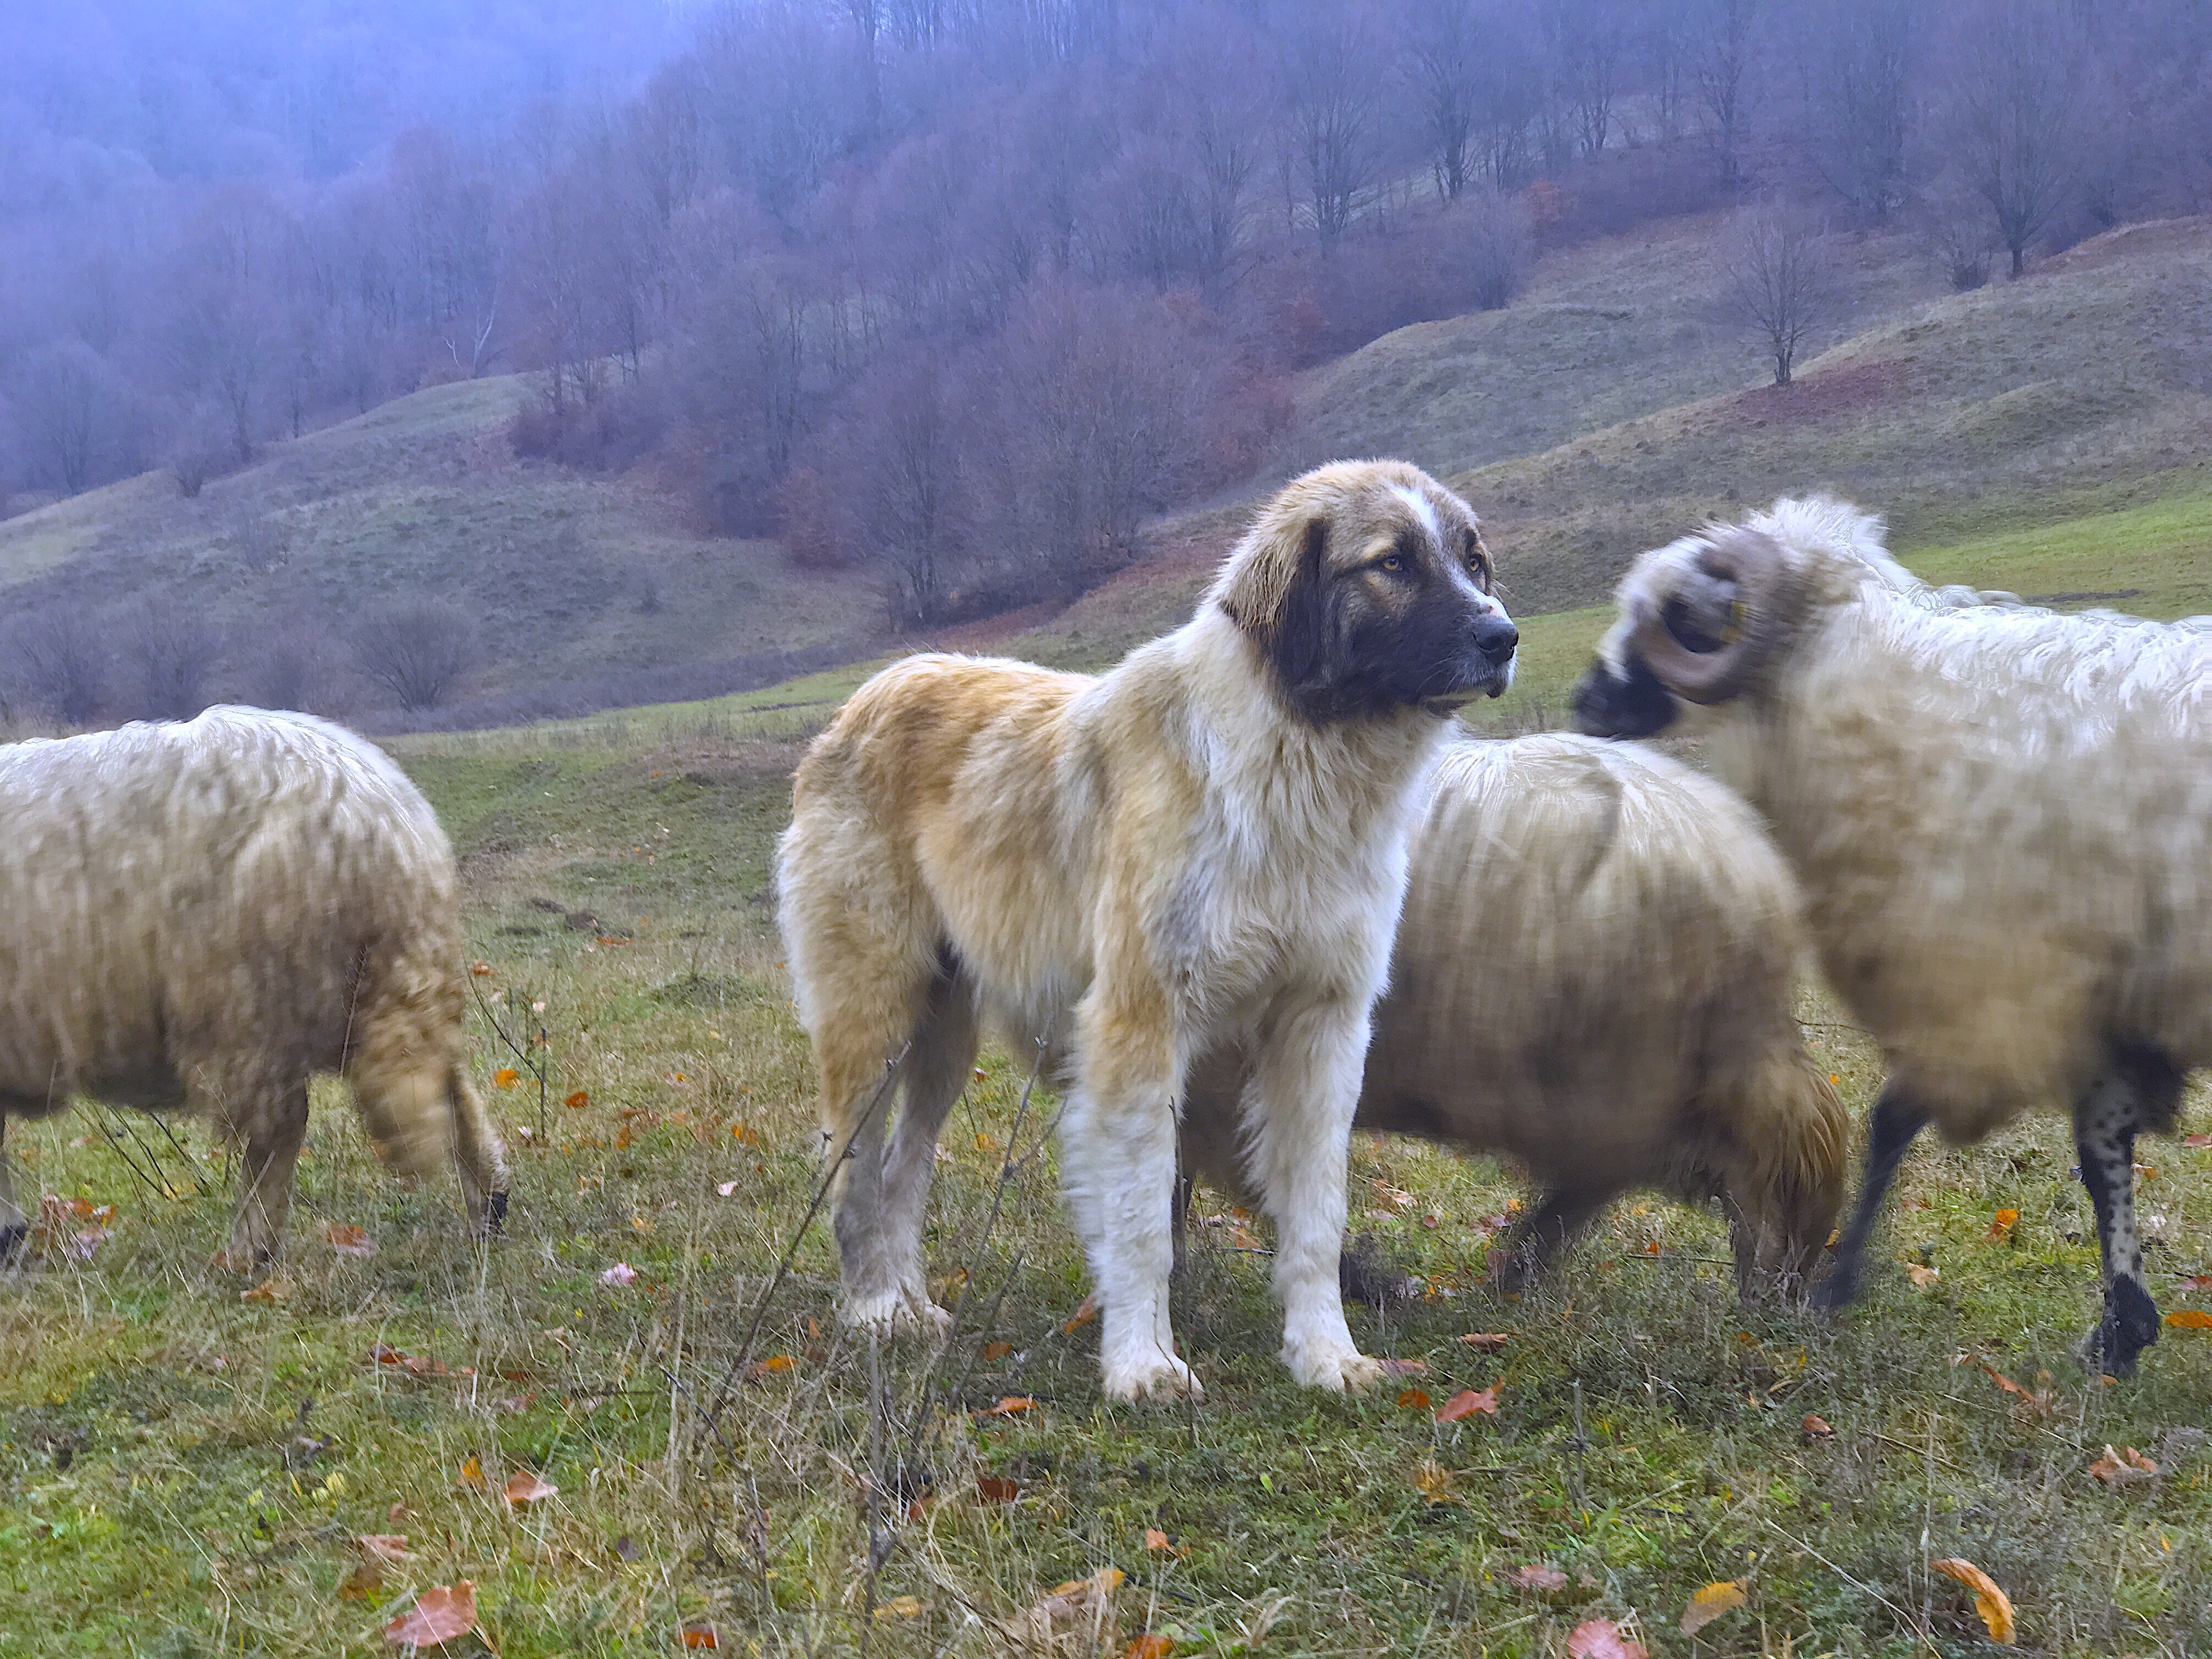 Malin Skinnars documentary from Romania about Shepherds and their dogs